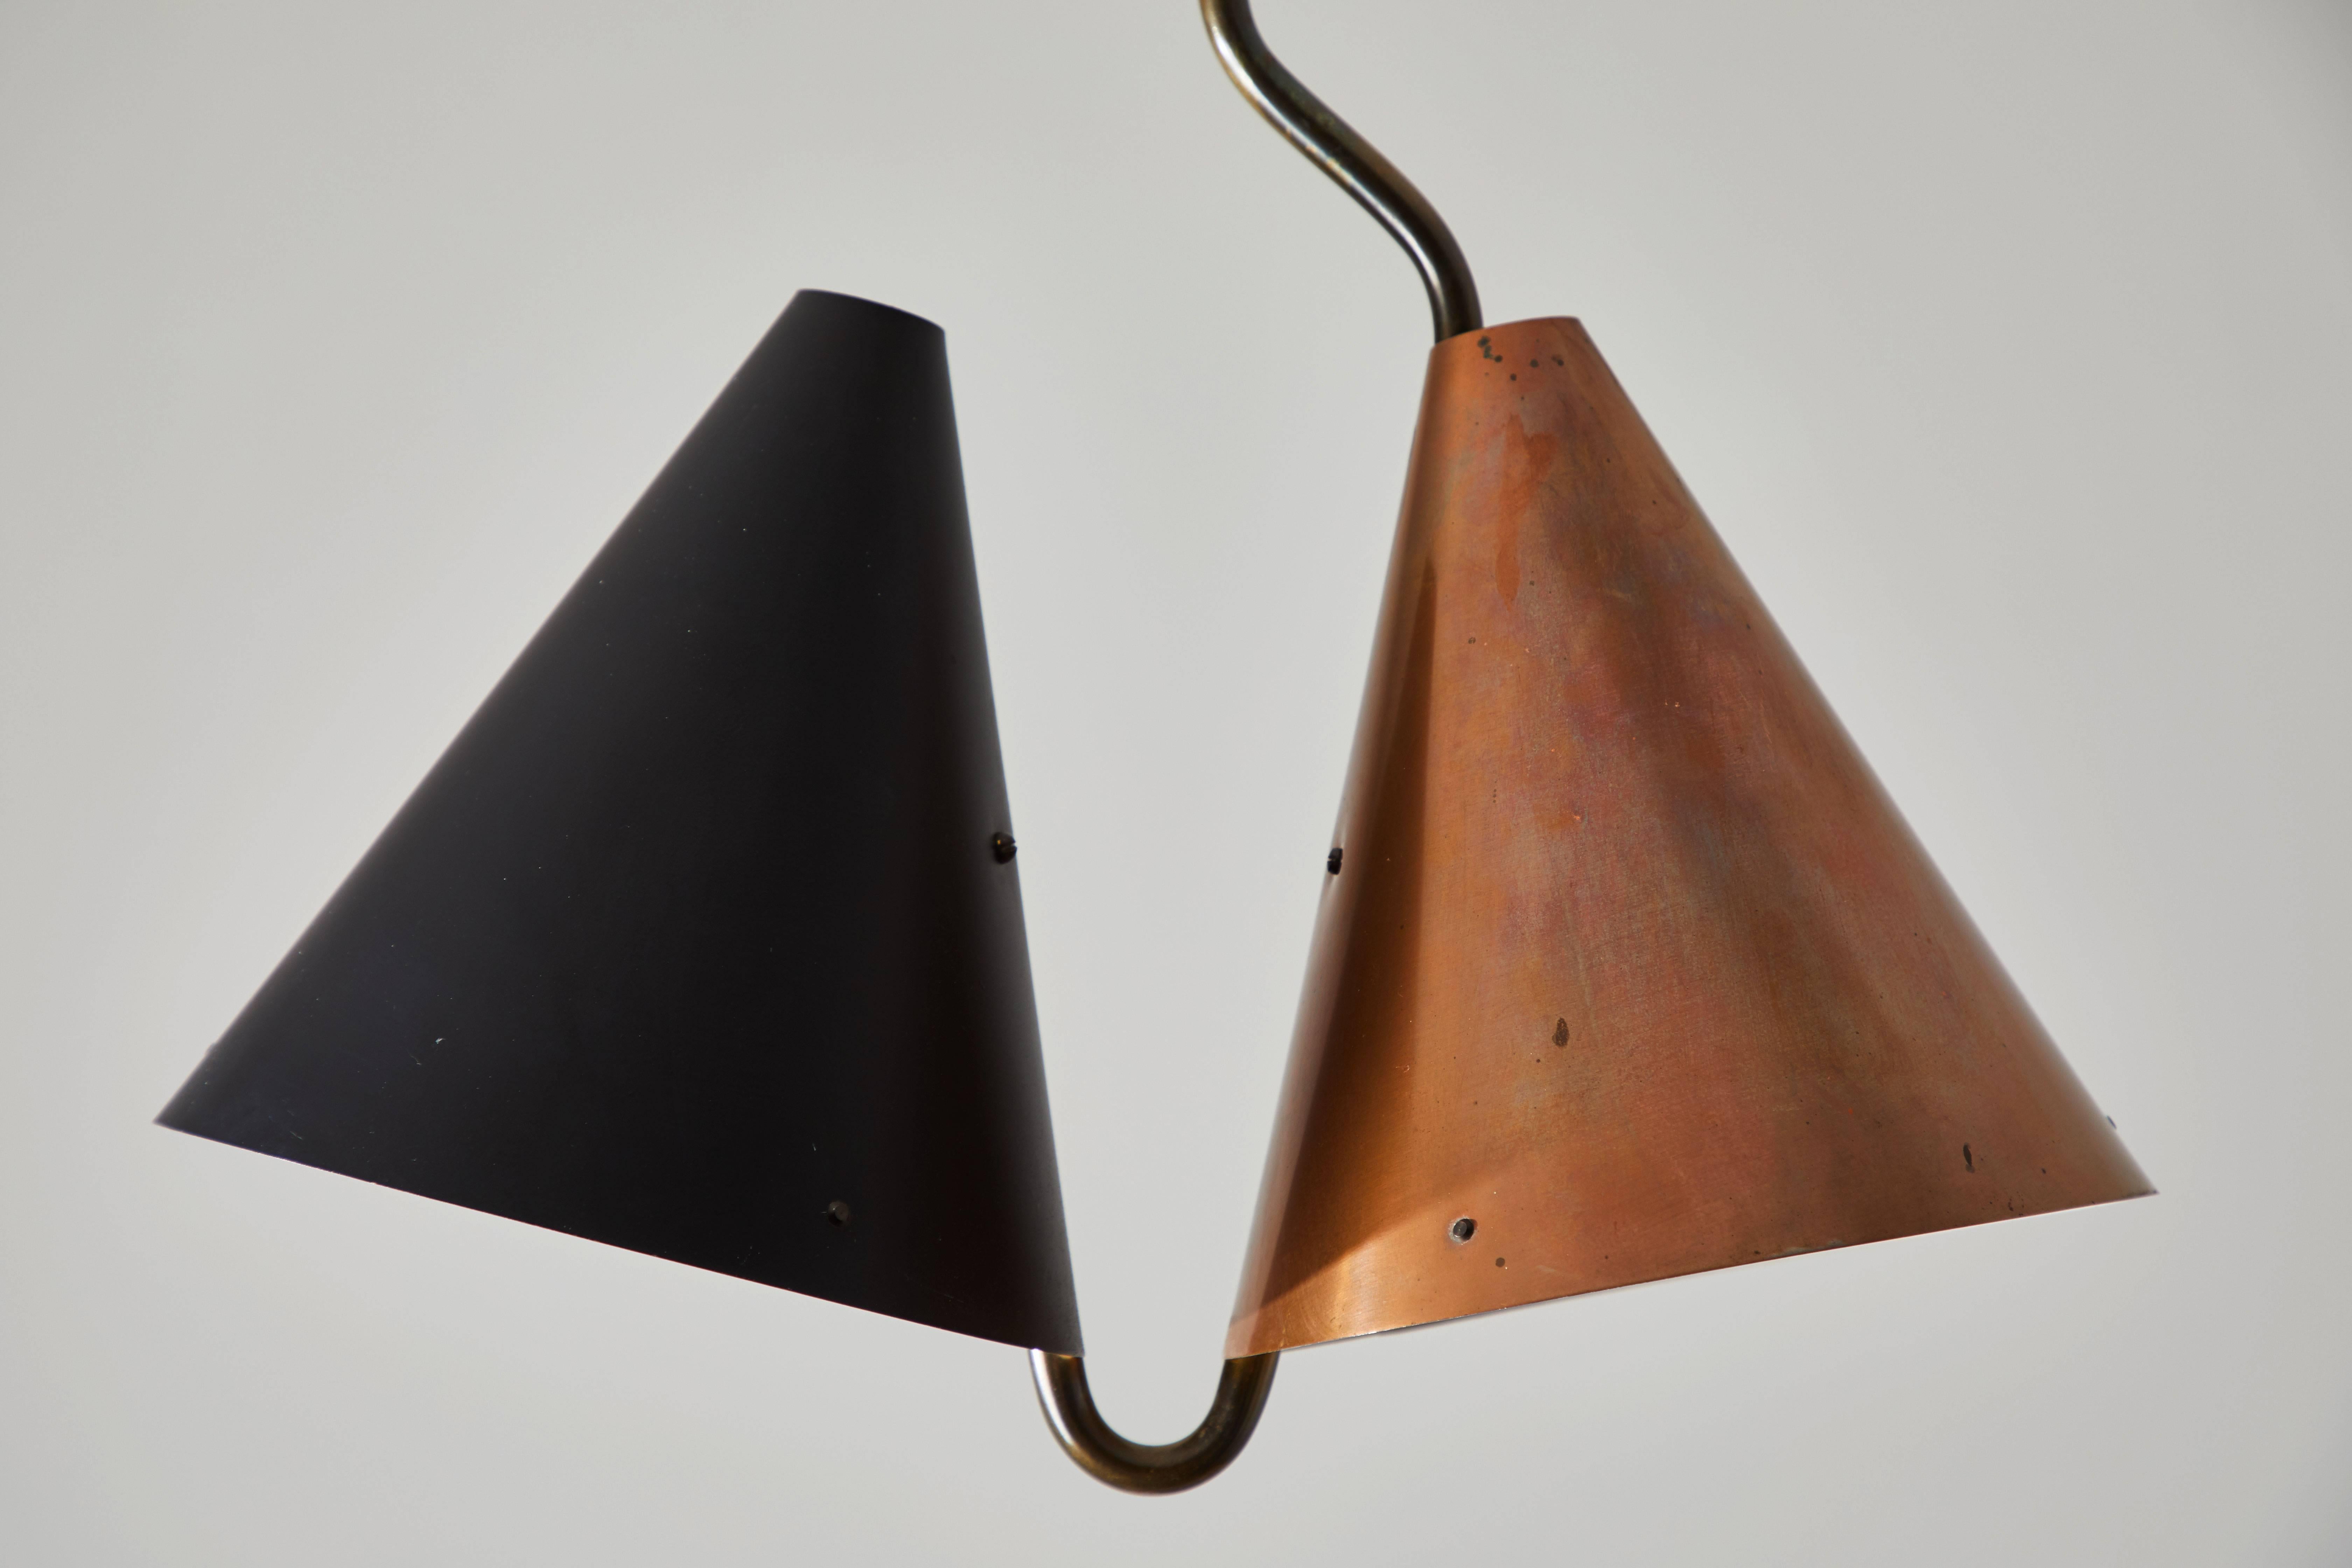 Plated Rare Double Pendant Lamp by Svend Aage Holm Sørensen for Lyfa